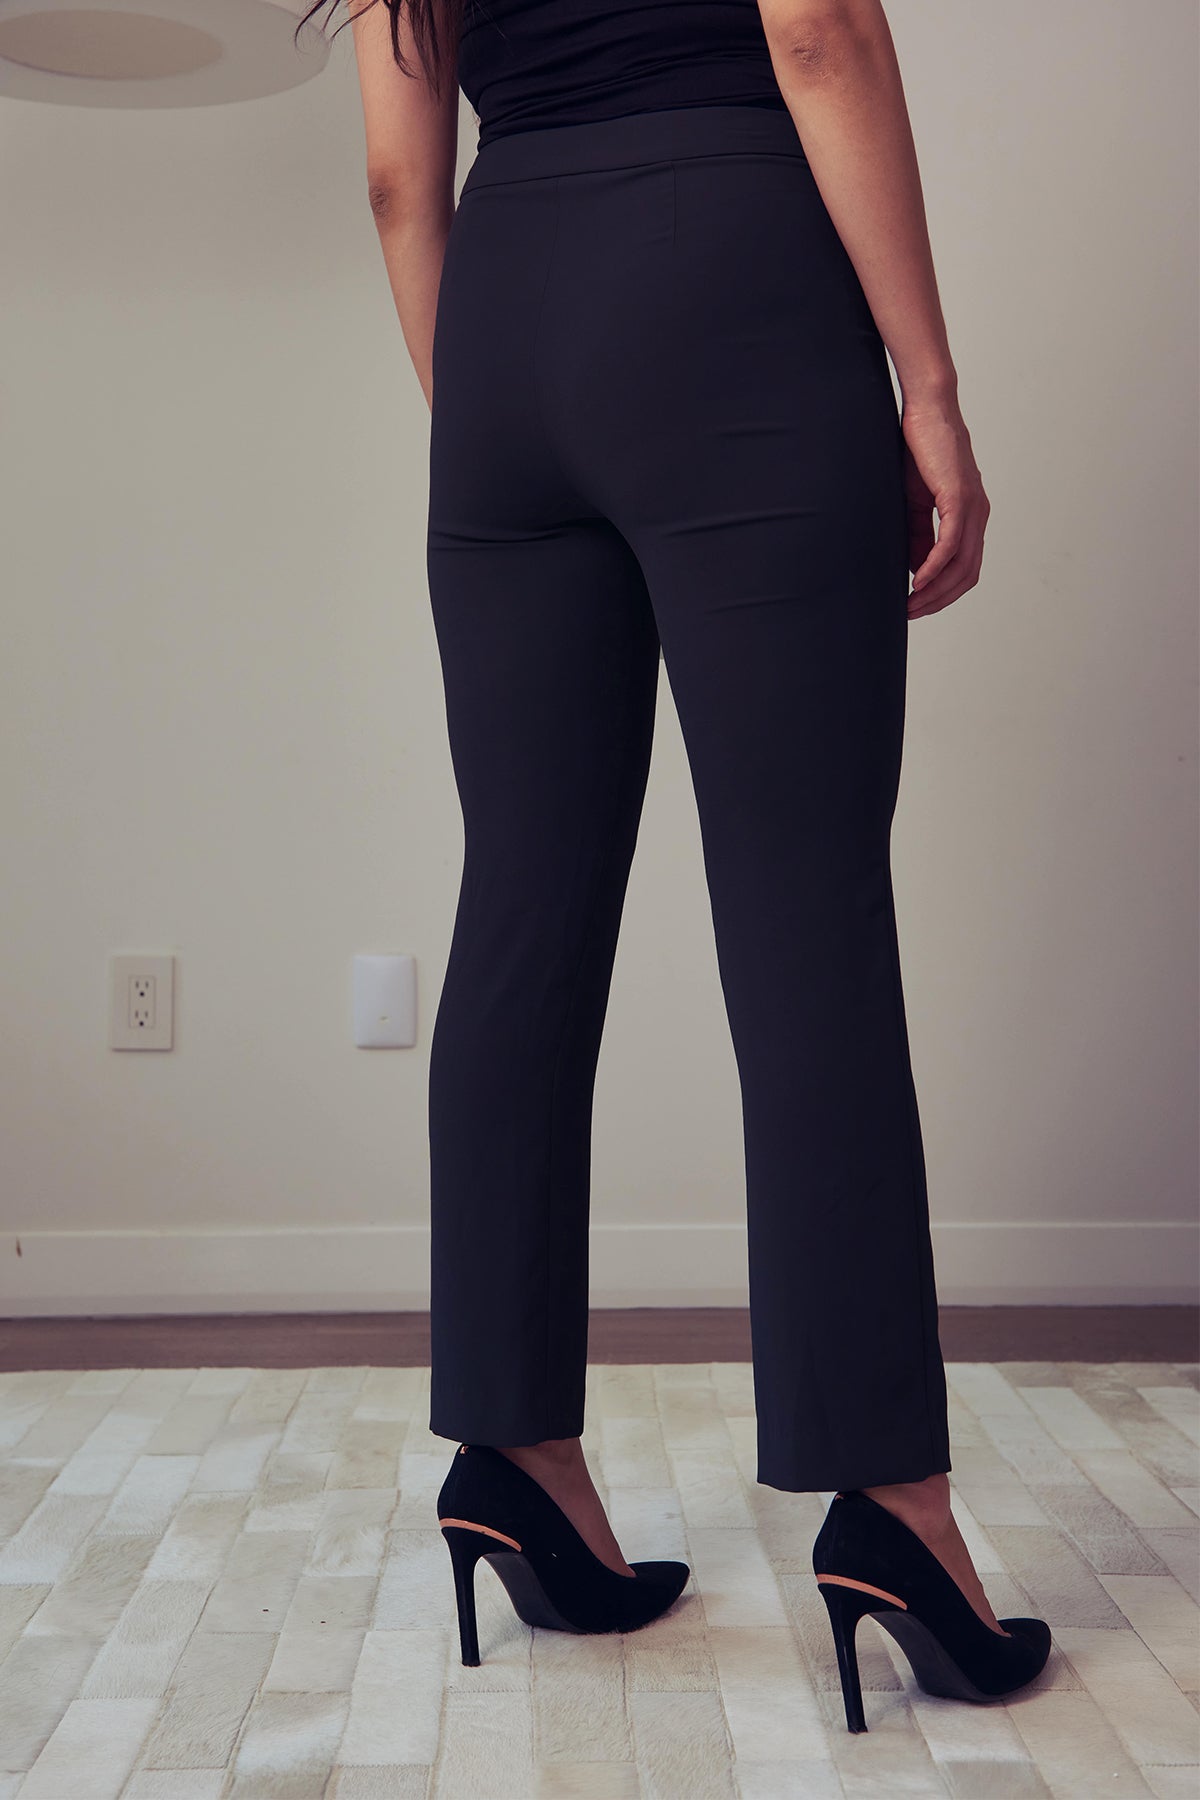 Women' Business JSX Cecilia Pant - Black NORA GARDNER | OFFICIAL STORE for work and office